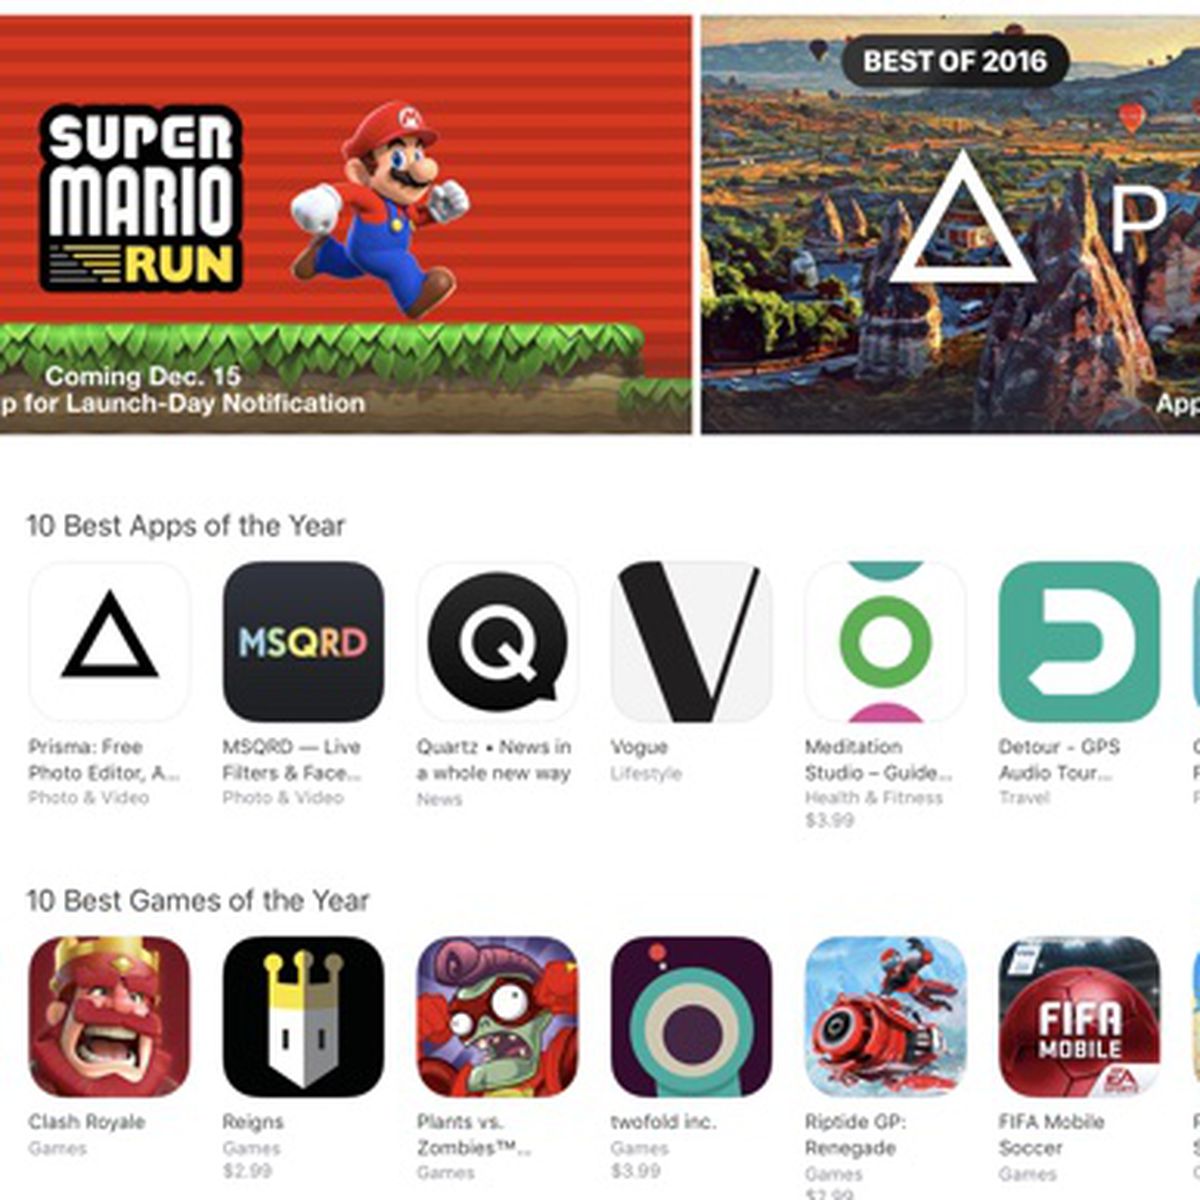 Google Play Store top apps, games for 2016 revealed: Prisma is